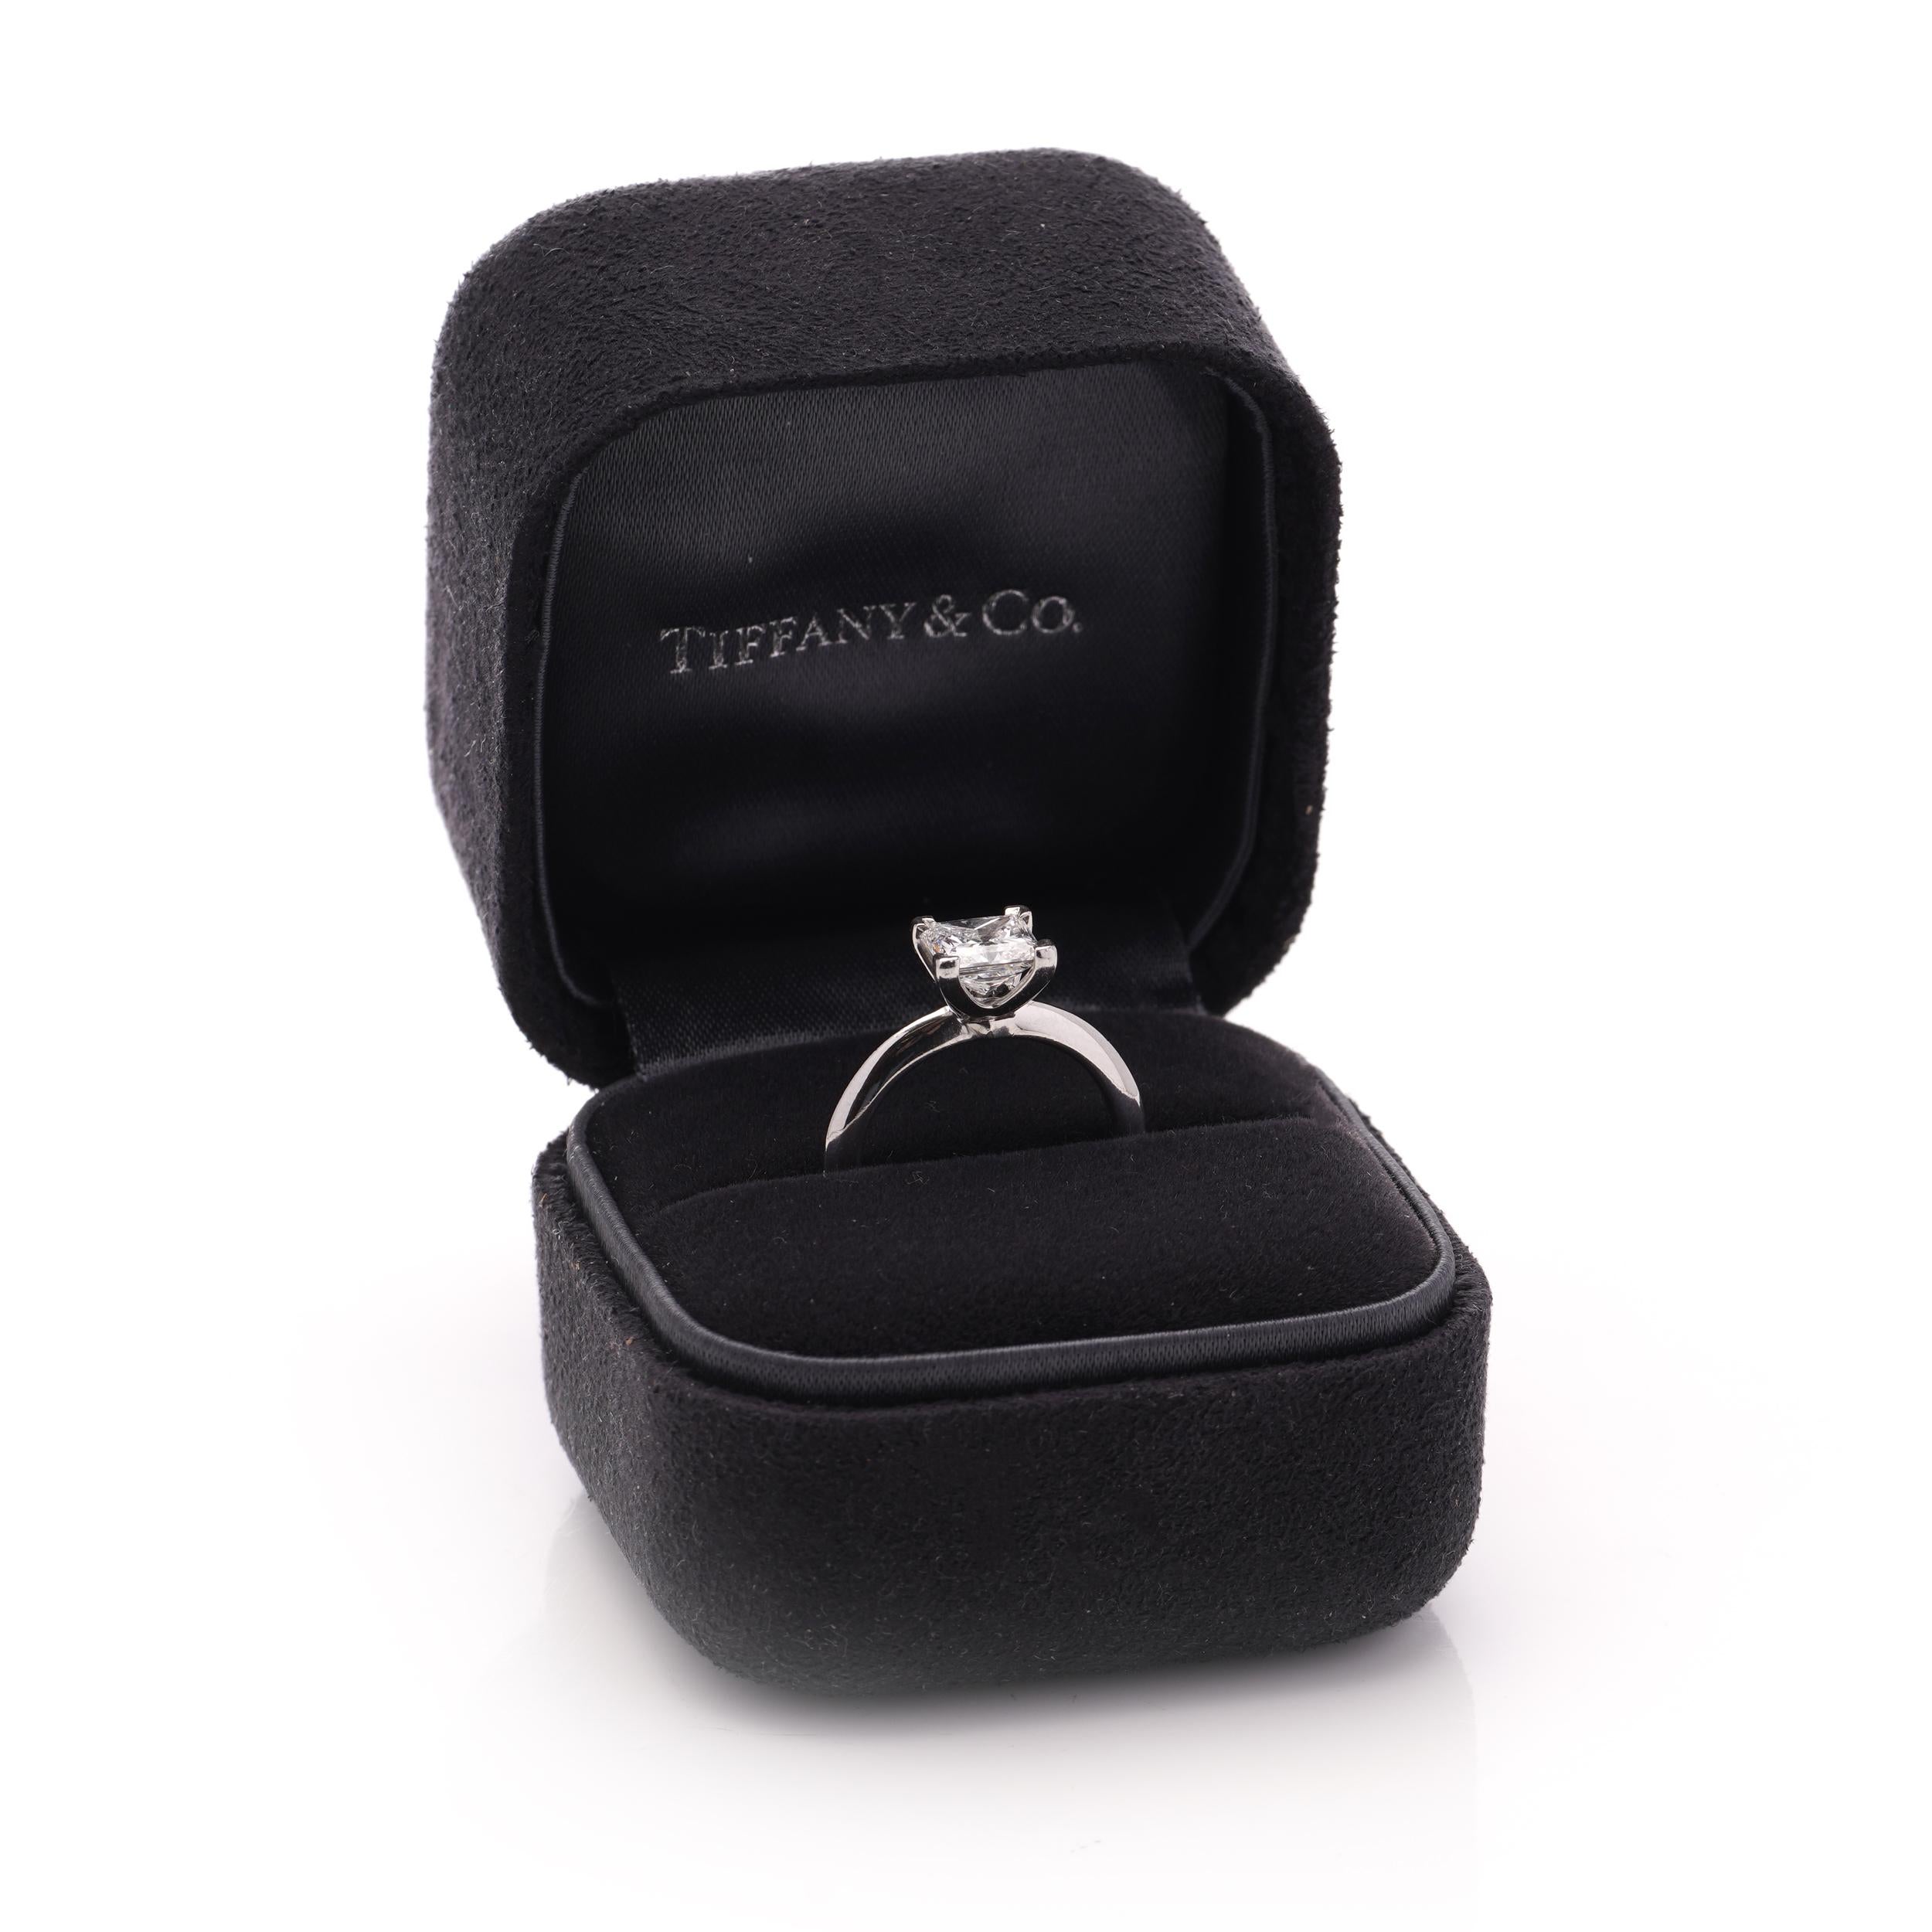 Tiffany & Co. Platinum ladies ring with 1.19 cts. Princess-cut diamond. 
Designer: Tiffany & Co. 
Made in 2018
Fully hallmarked.
Comes with a serial number. 

Comes in  original Tiffany & Co. box. 

Dimension -
Ring Size: 2.5 x 2 x 0.7 cm 
Finger